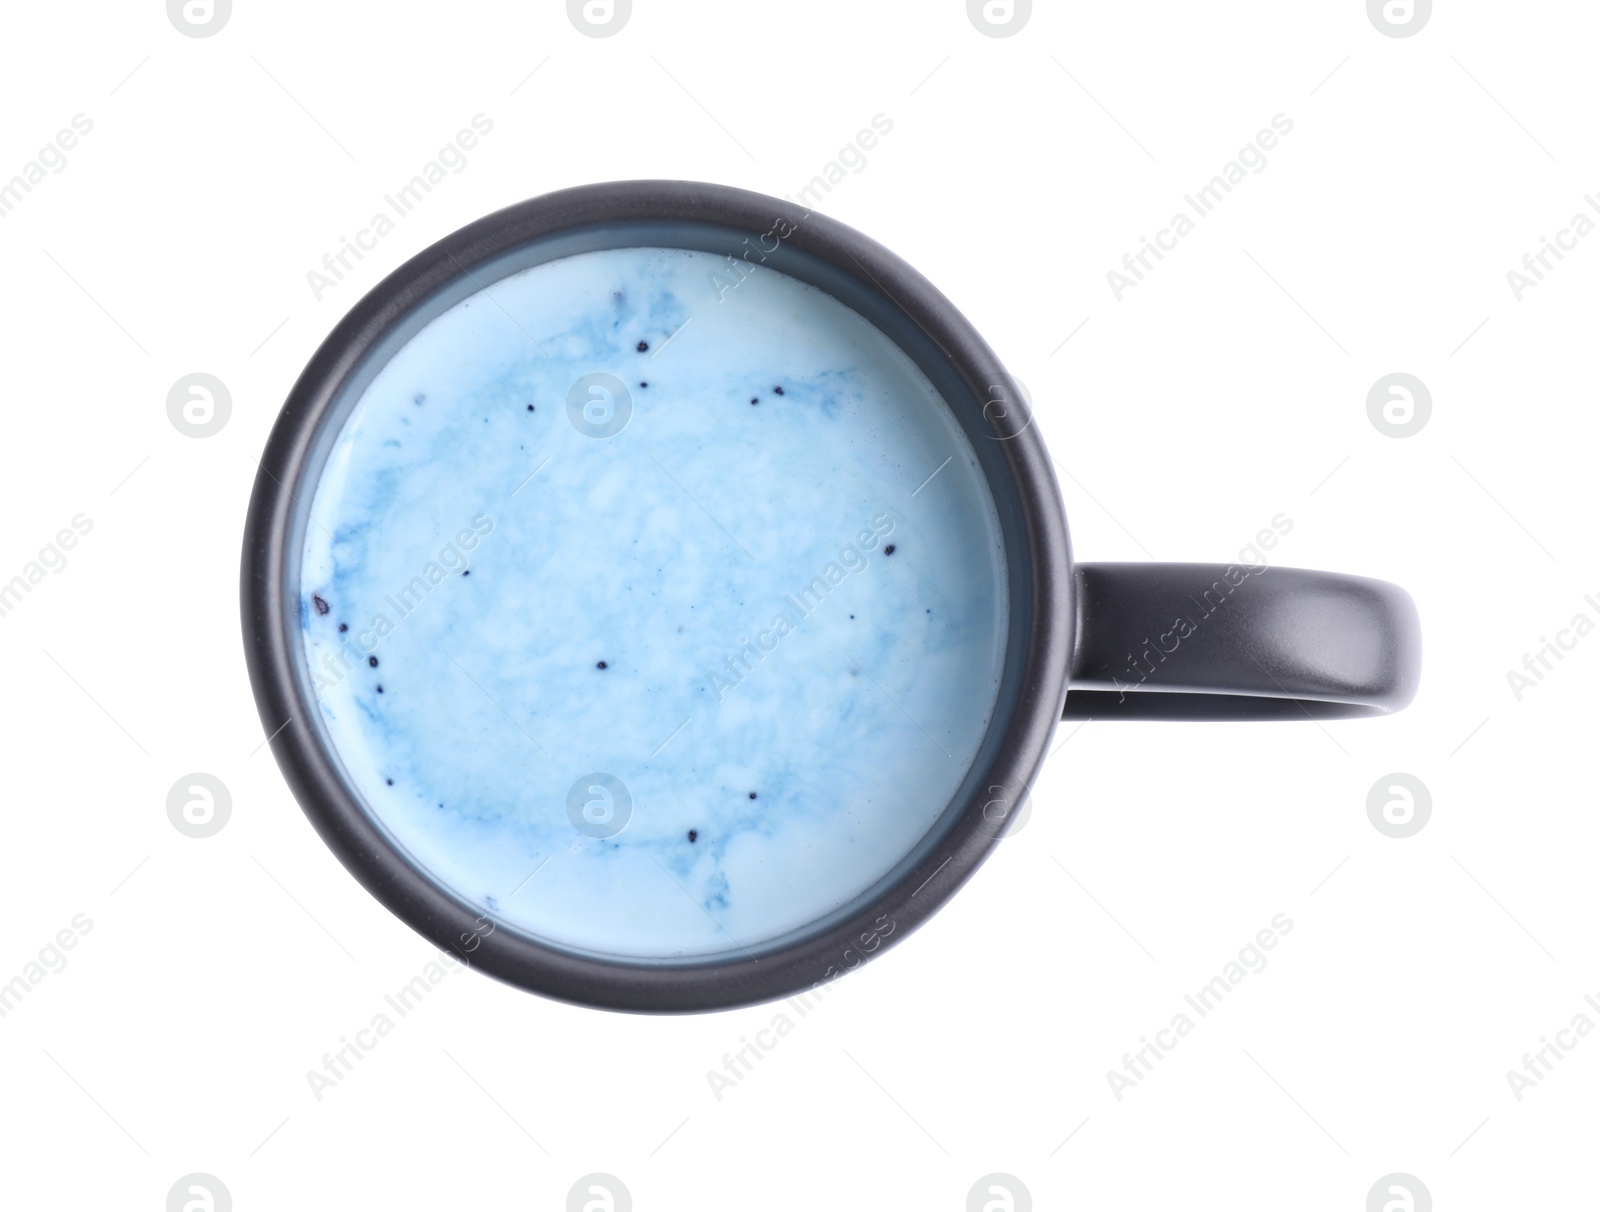 Image of Blue matcha latte in cup on white background, top view